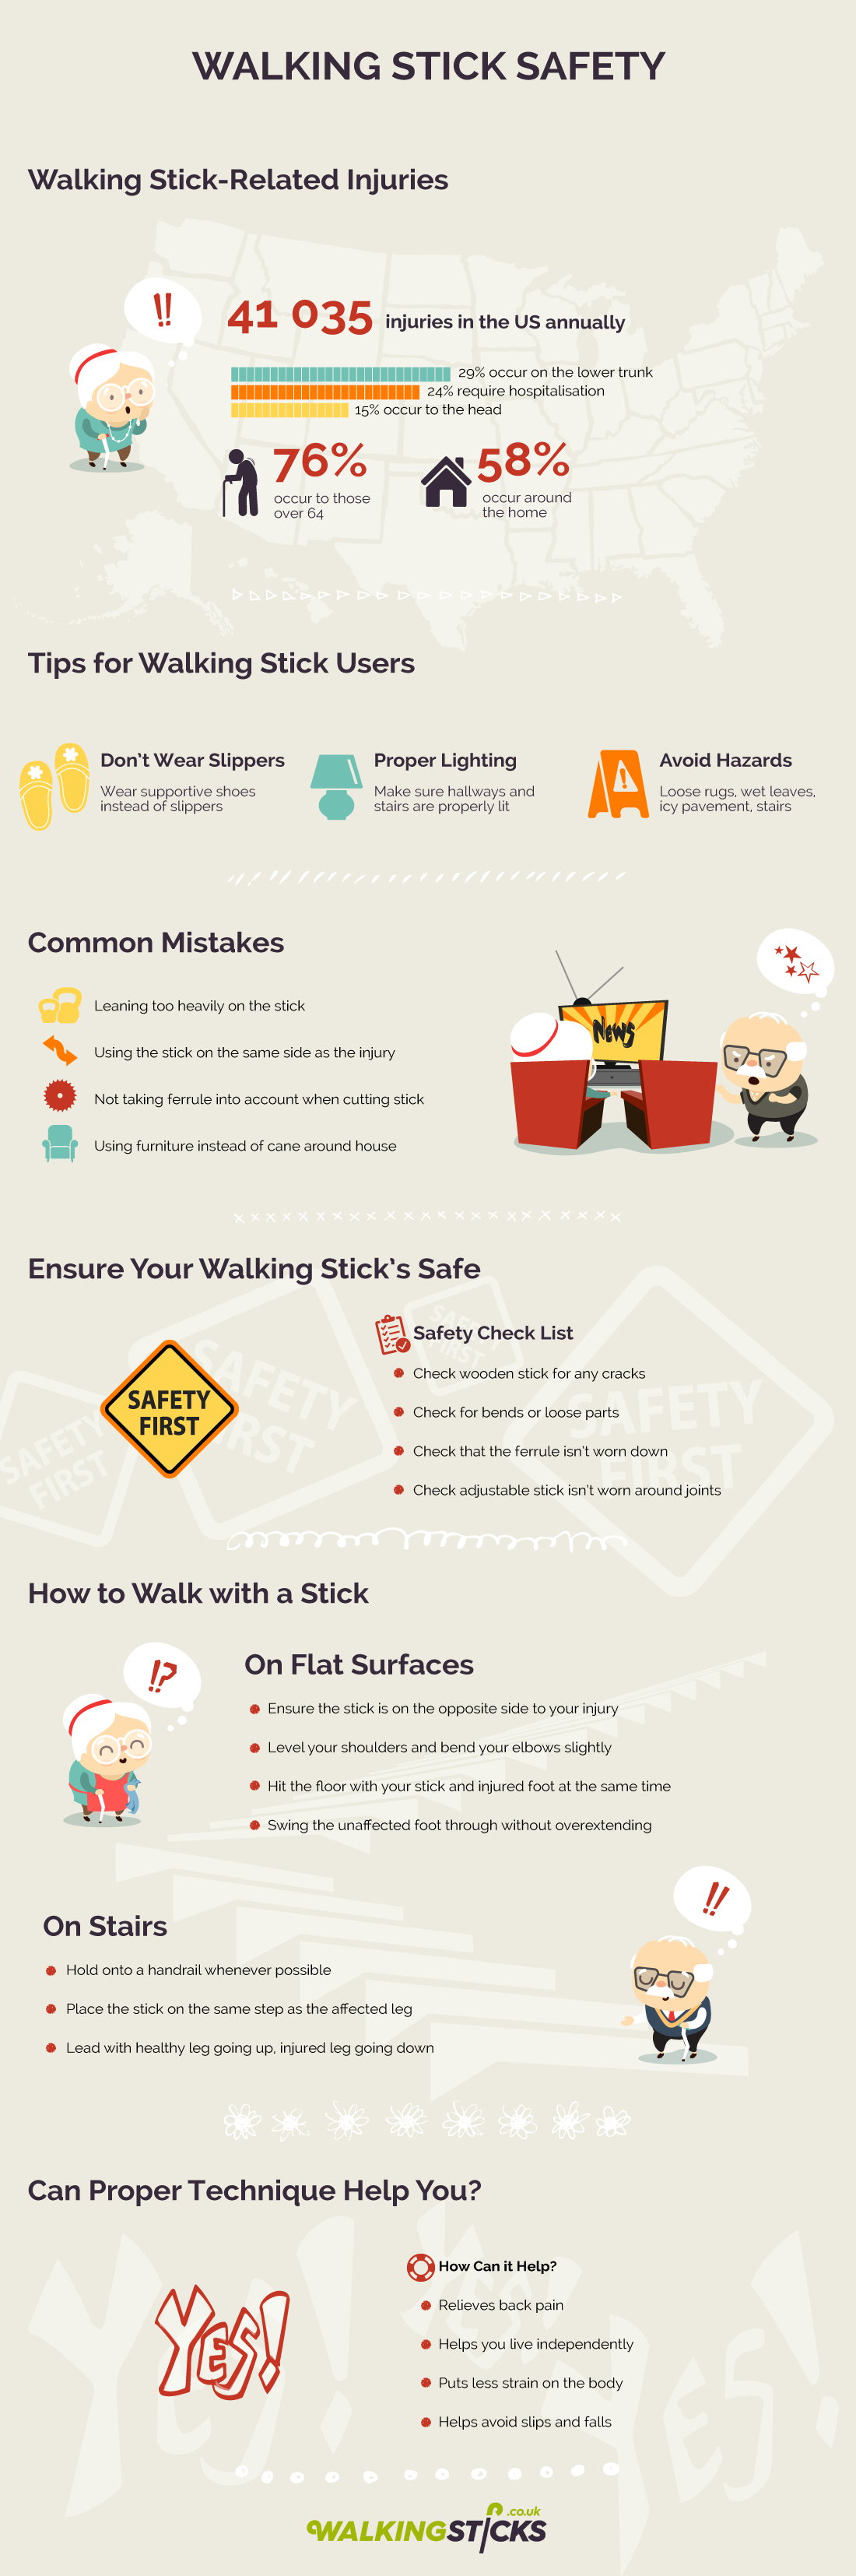 Walking Stick Safety Guide